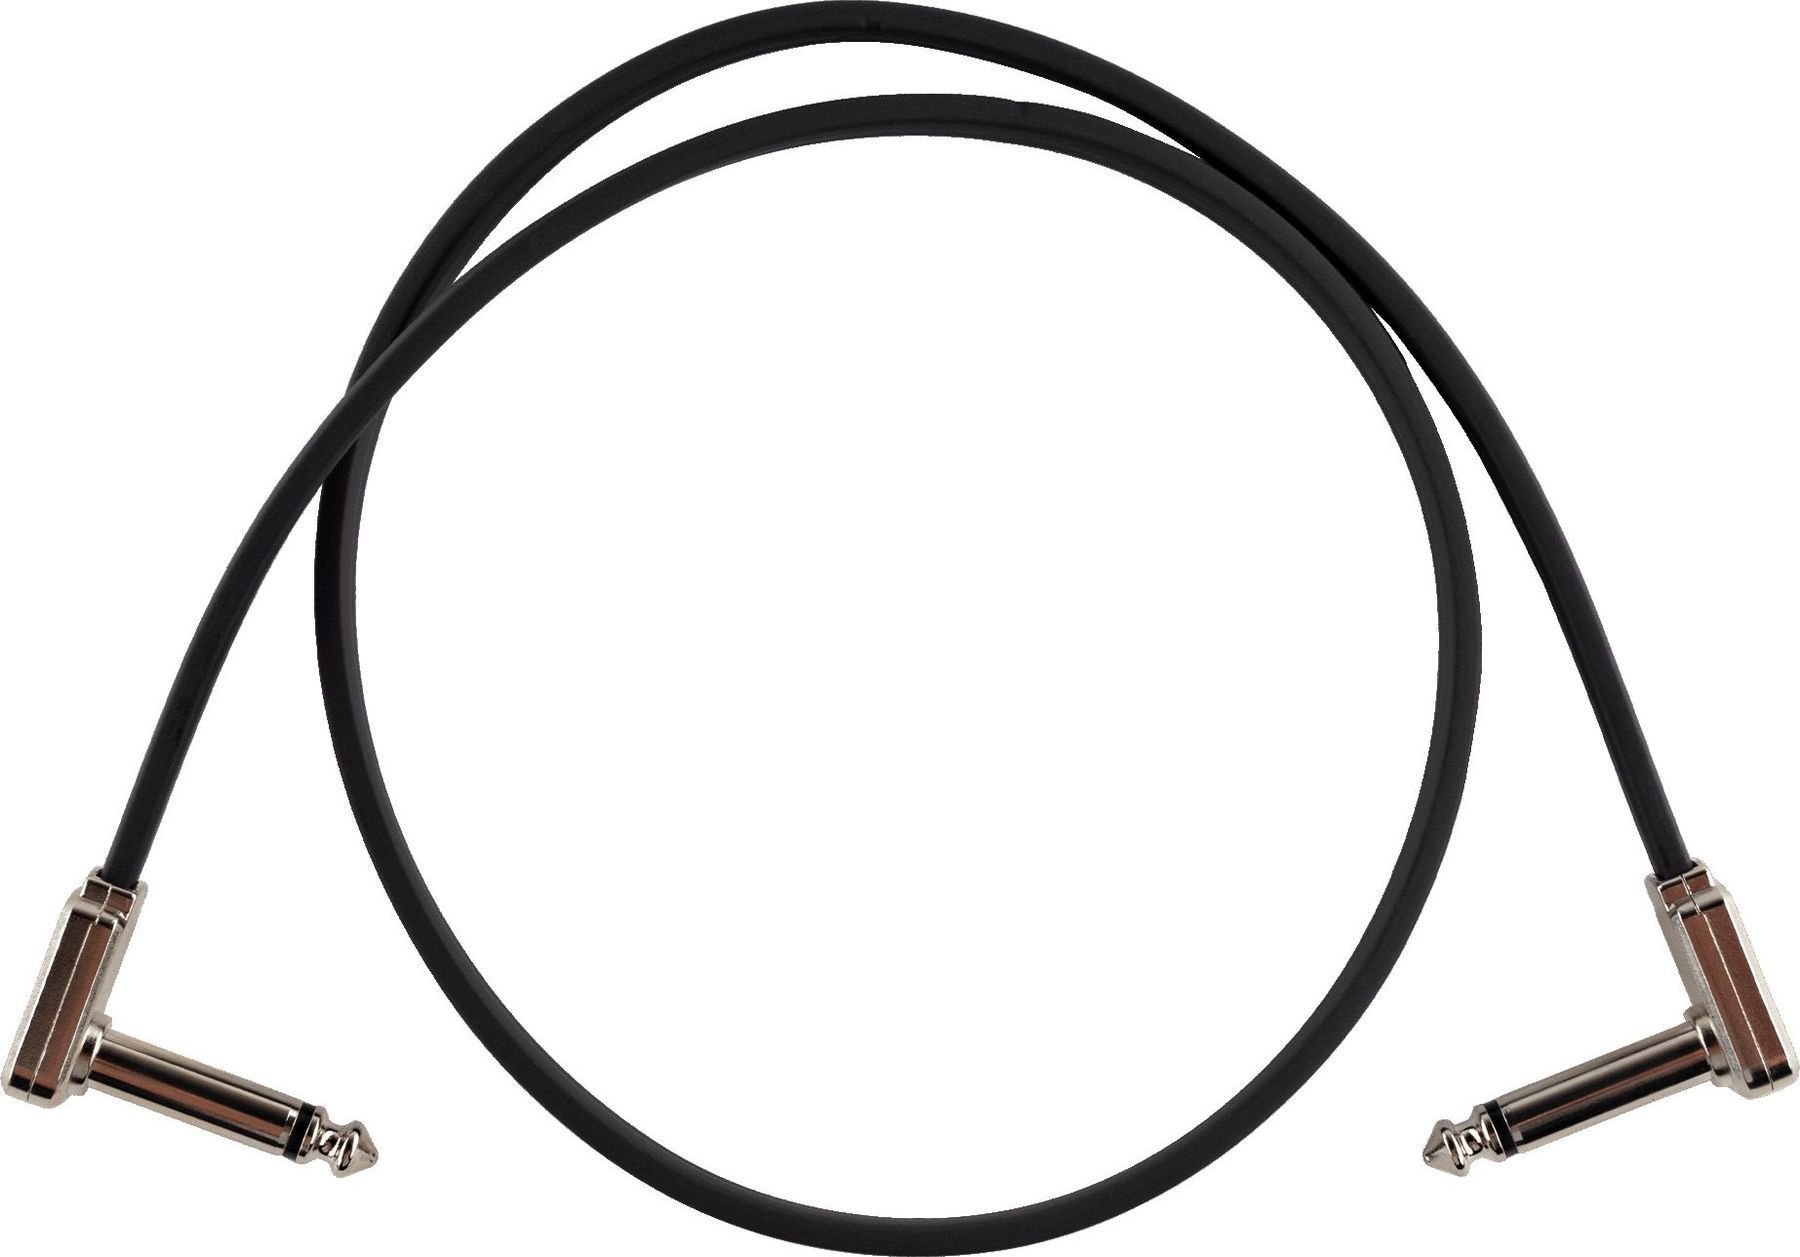 Adapter/Patch Cable Ernie Ball P06228 Black 60 cm Angled - Angled